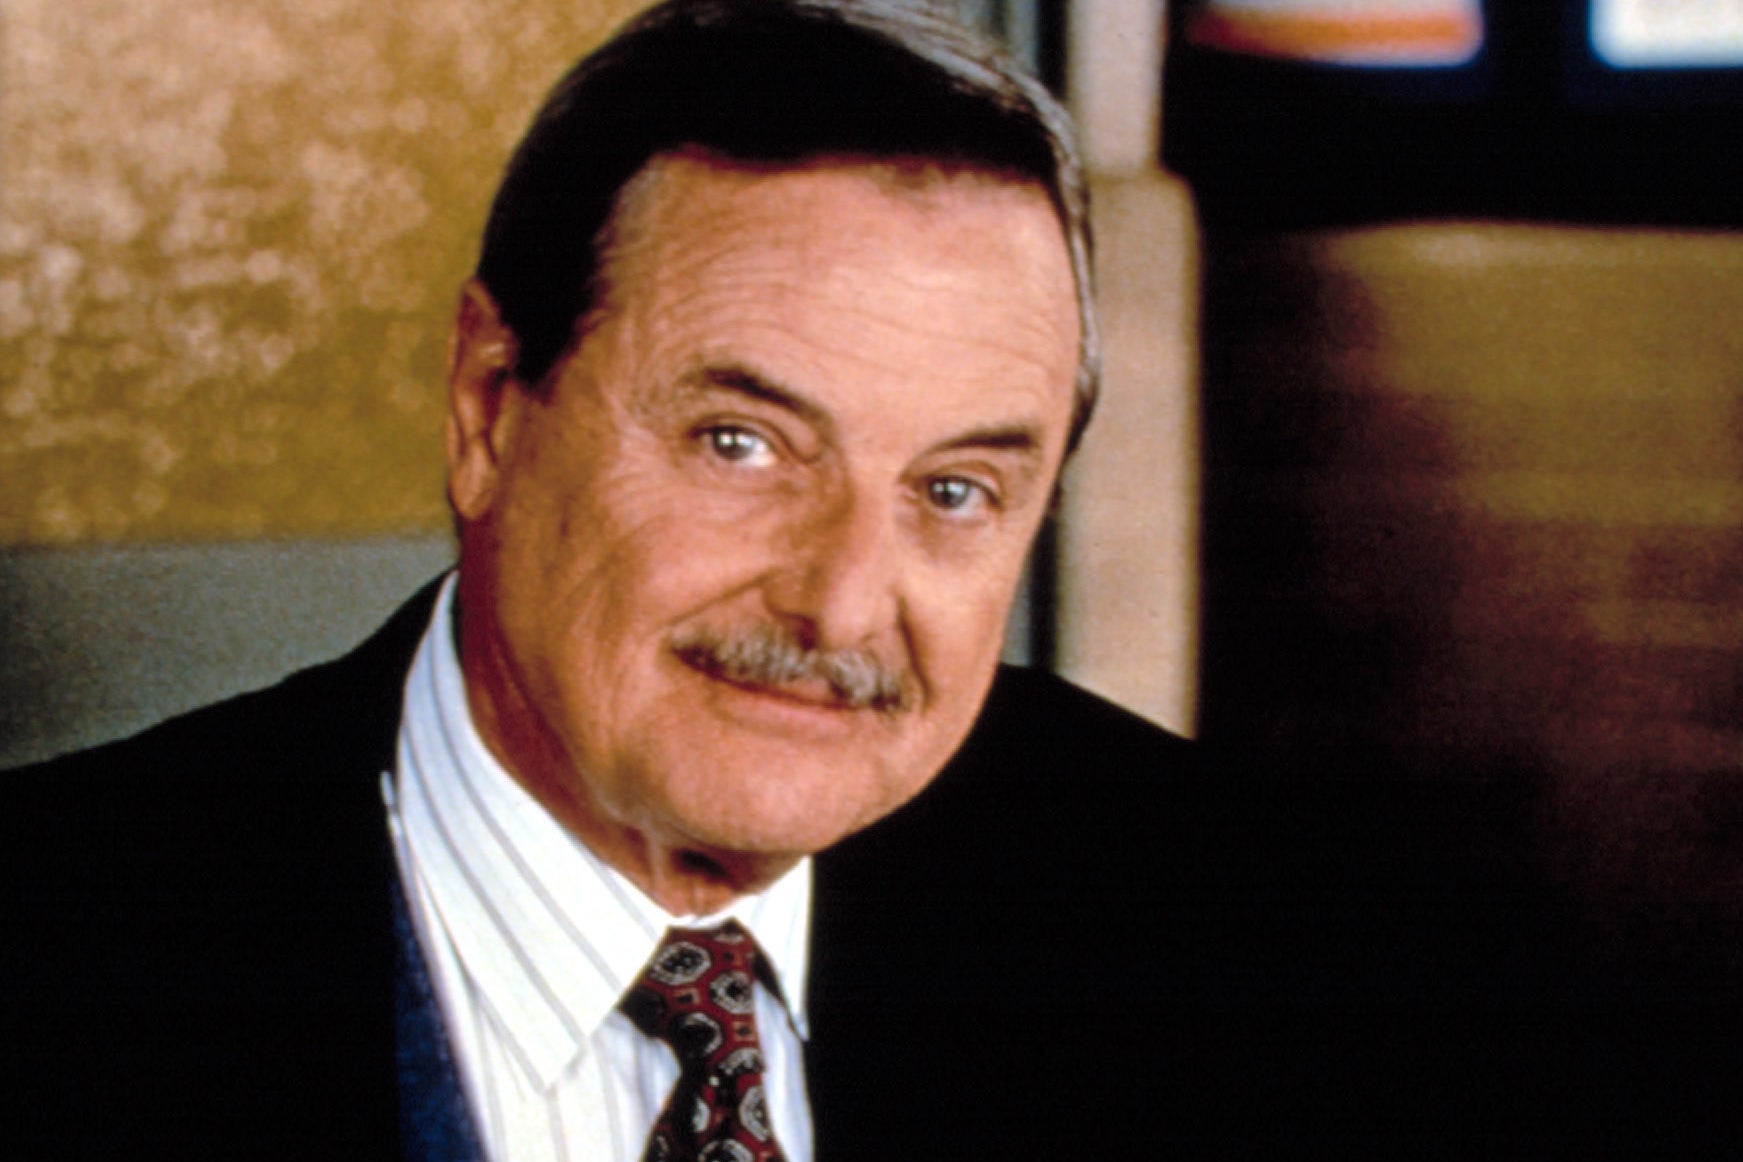 Heres What Mr. Feeny Is Up To At 94, Because Its The Only Celeb Update That Matters TBH